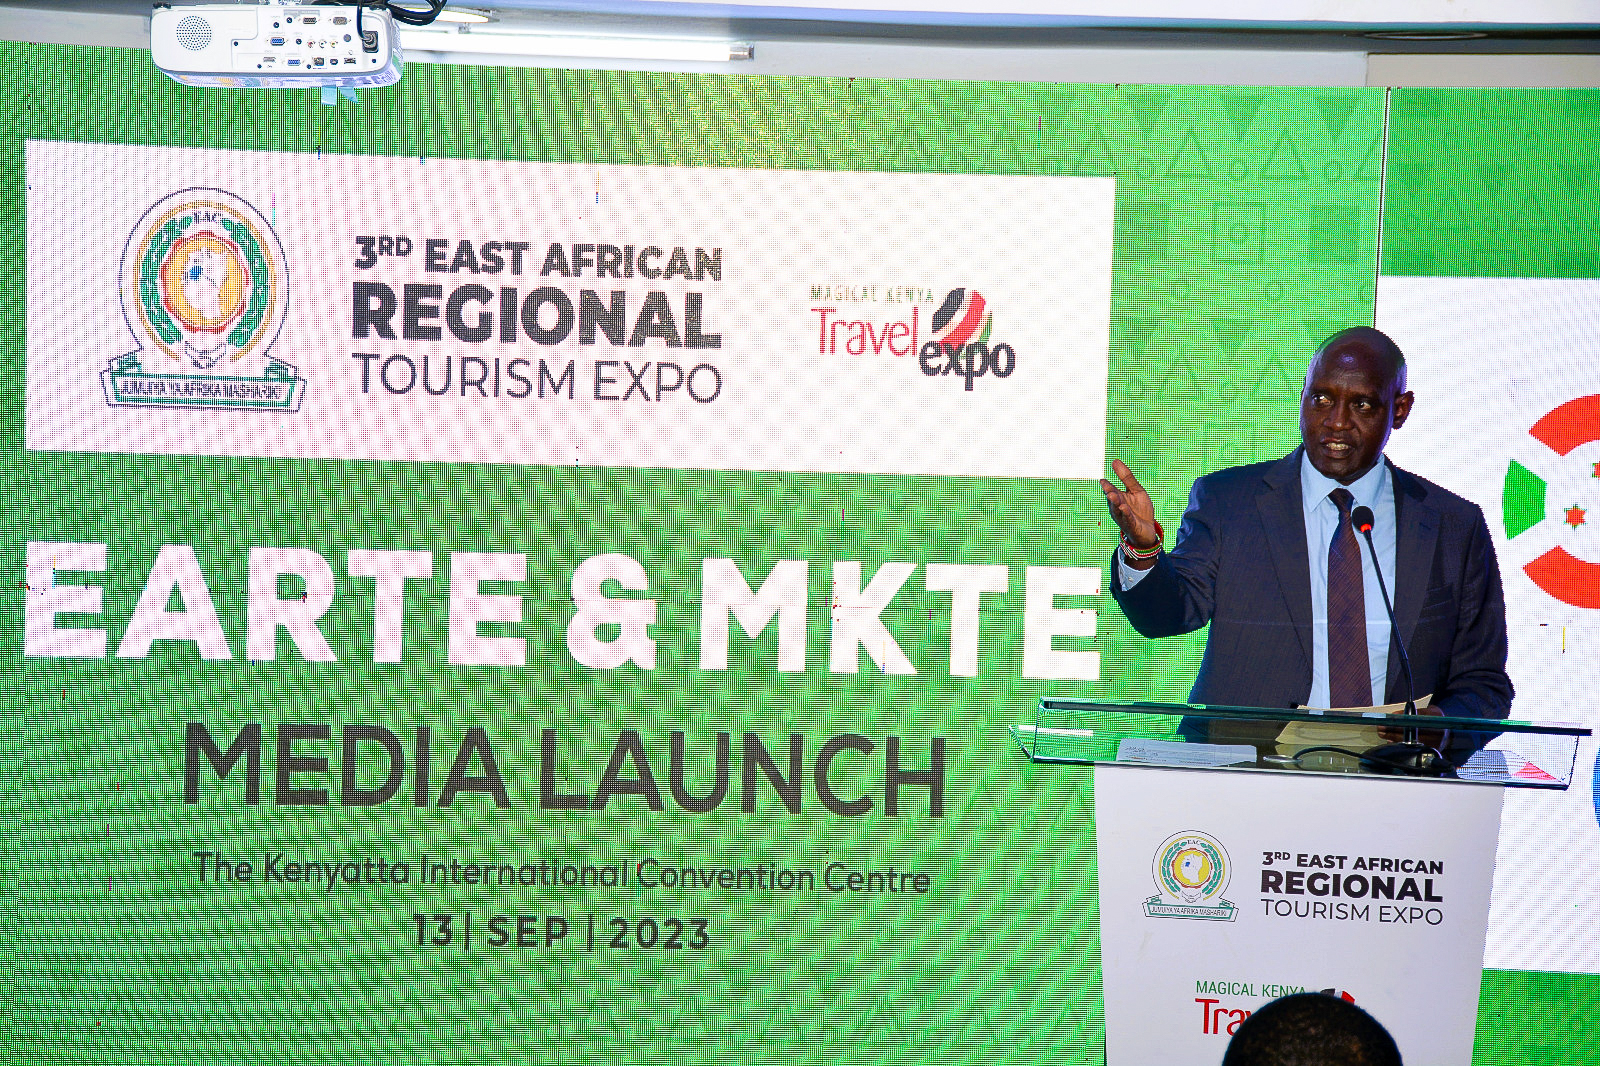 The Principal Secretary State Department for Tourism, Hon. John Olotuaa, giving his remarks during the East African Regional Tourism Expo and Magical Kenya Travel Expo launch.